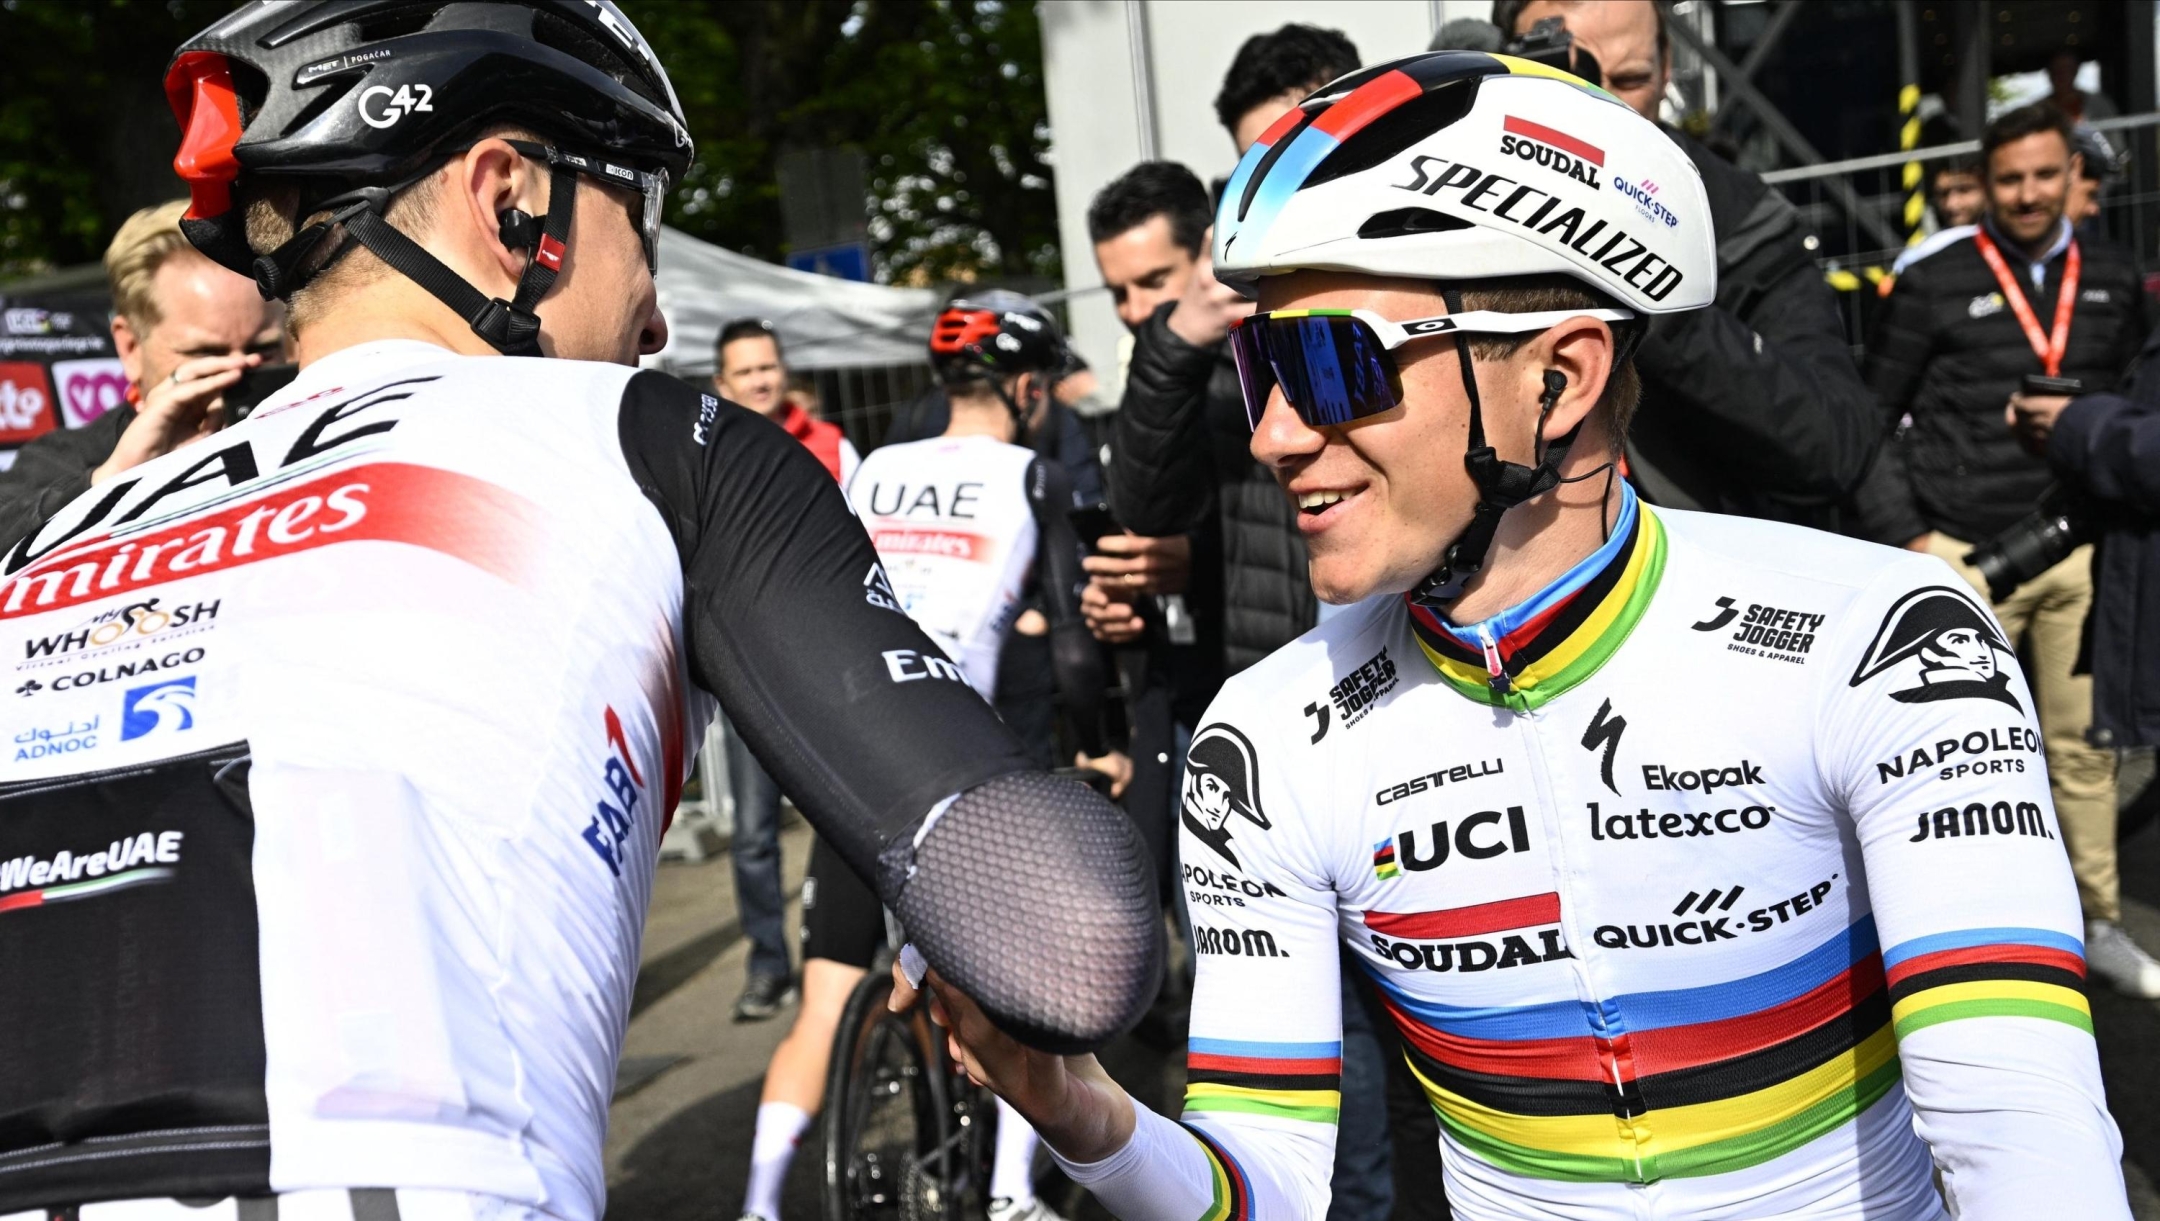 UAE Team Emirates' Slovenian rider Tadej Pogacar (L) shakes hands with Soudal Quick-Step's Belgian rider Remco Evenepoel prior to the start of the men elite race of the Liege-Bastogne-Liege one day cycling event, 258,5 km from Liege to Liege, on April 23, 2023. (Photo by JASPER JACOBS / Belga / AFP) / Belgium OUT